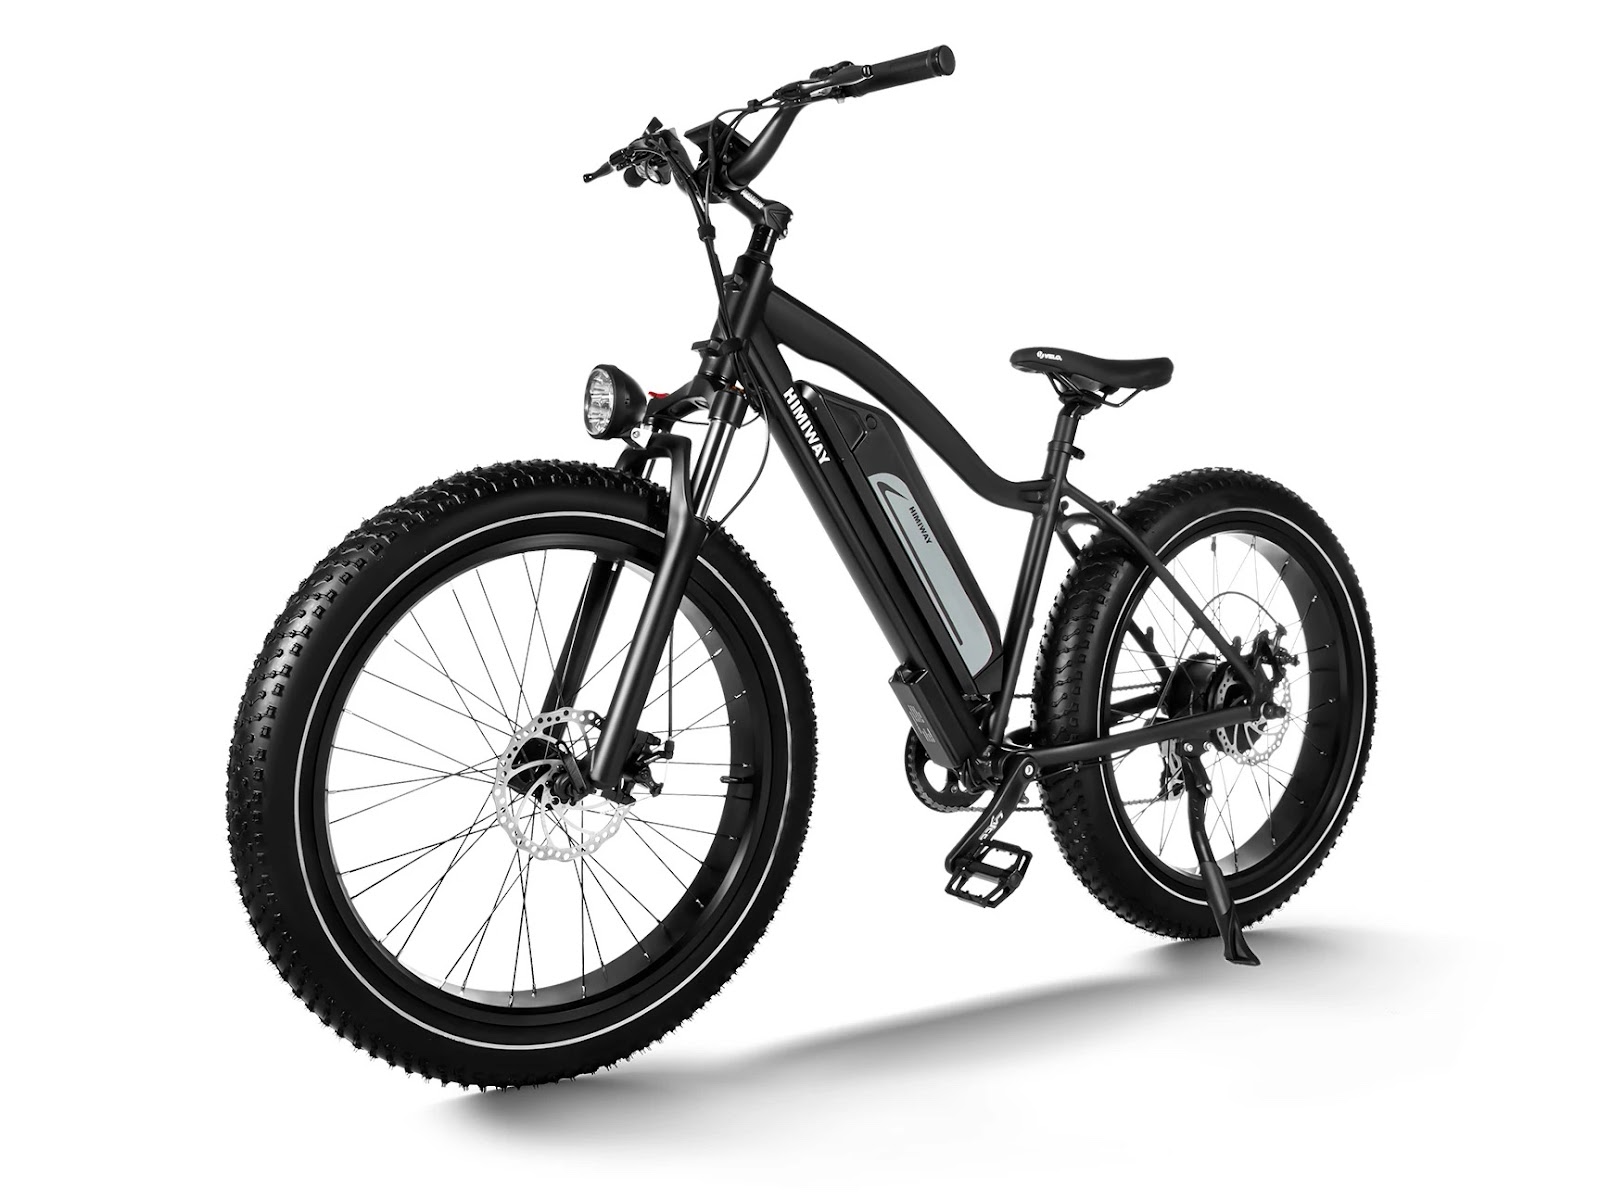 Himiway Cruiser Review 2022 - 4 inch wide fat tires for all-terrain riding